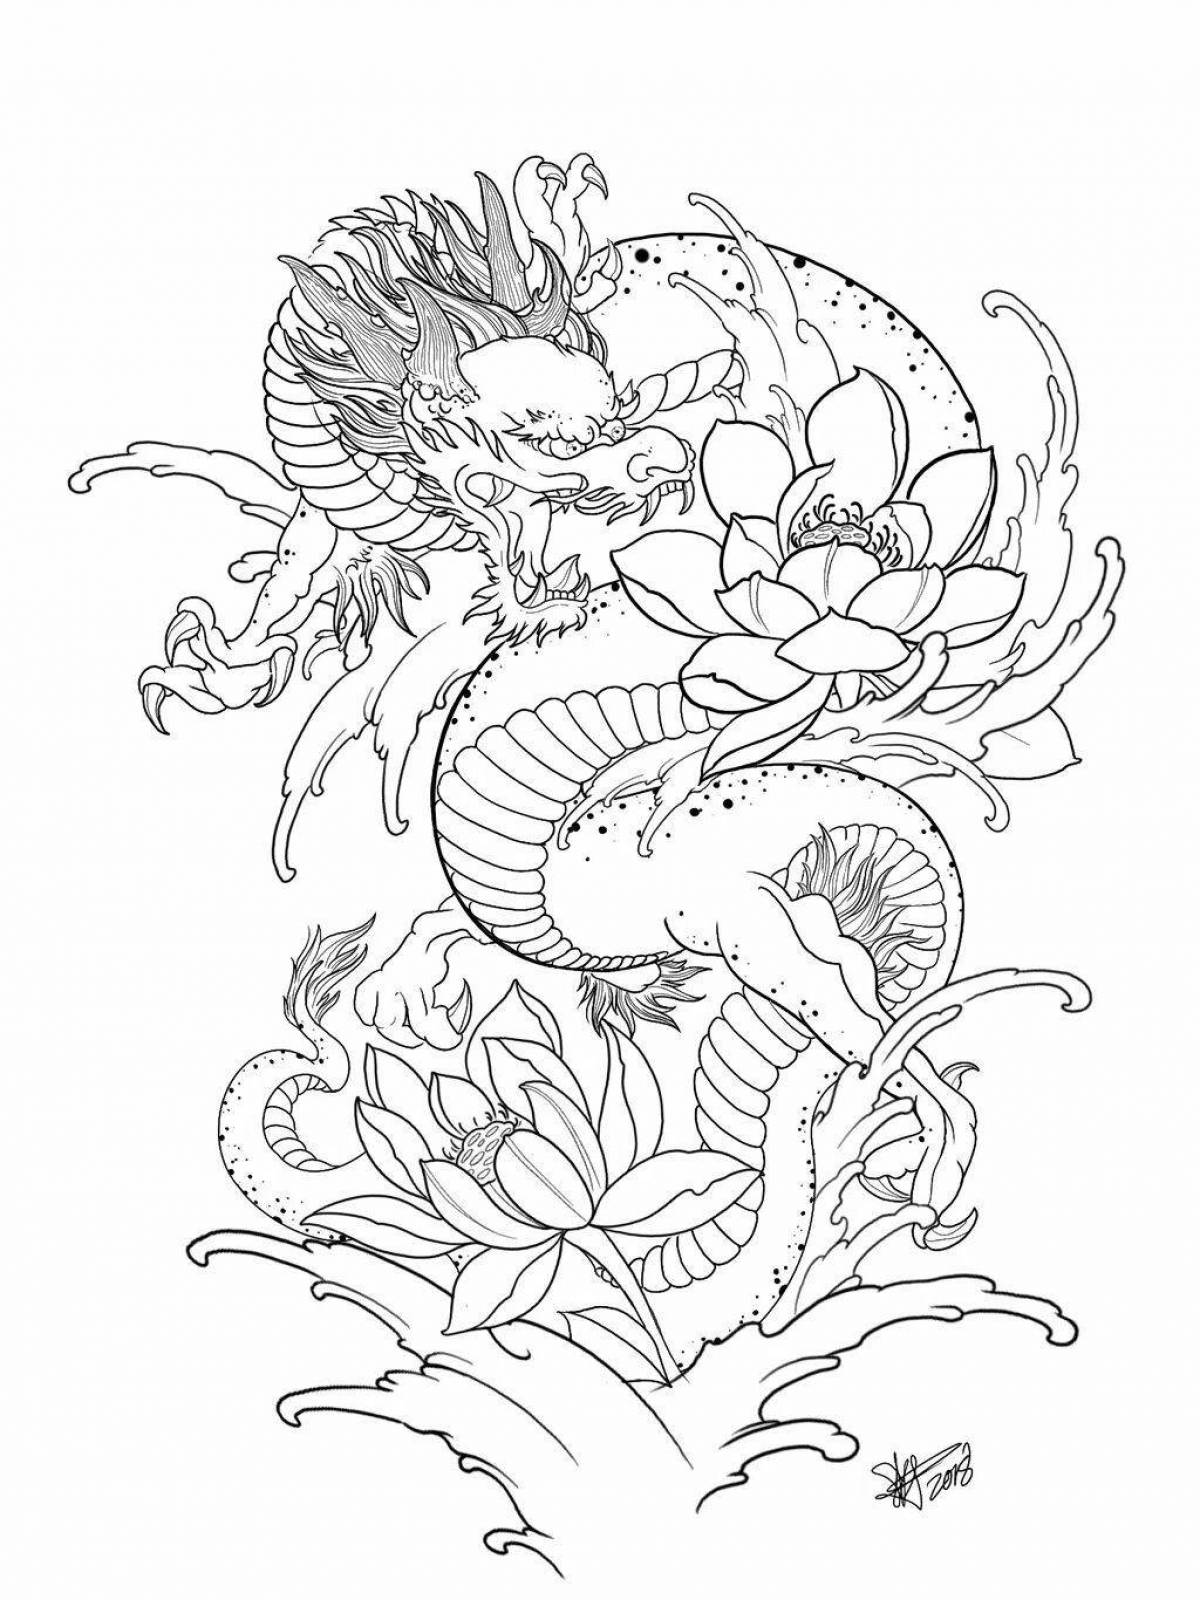 Coloring book magnanimous japanese dragon